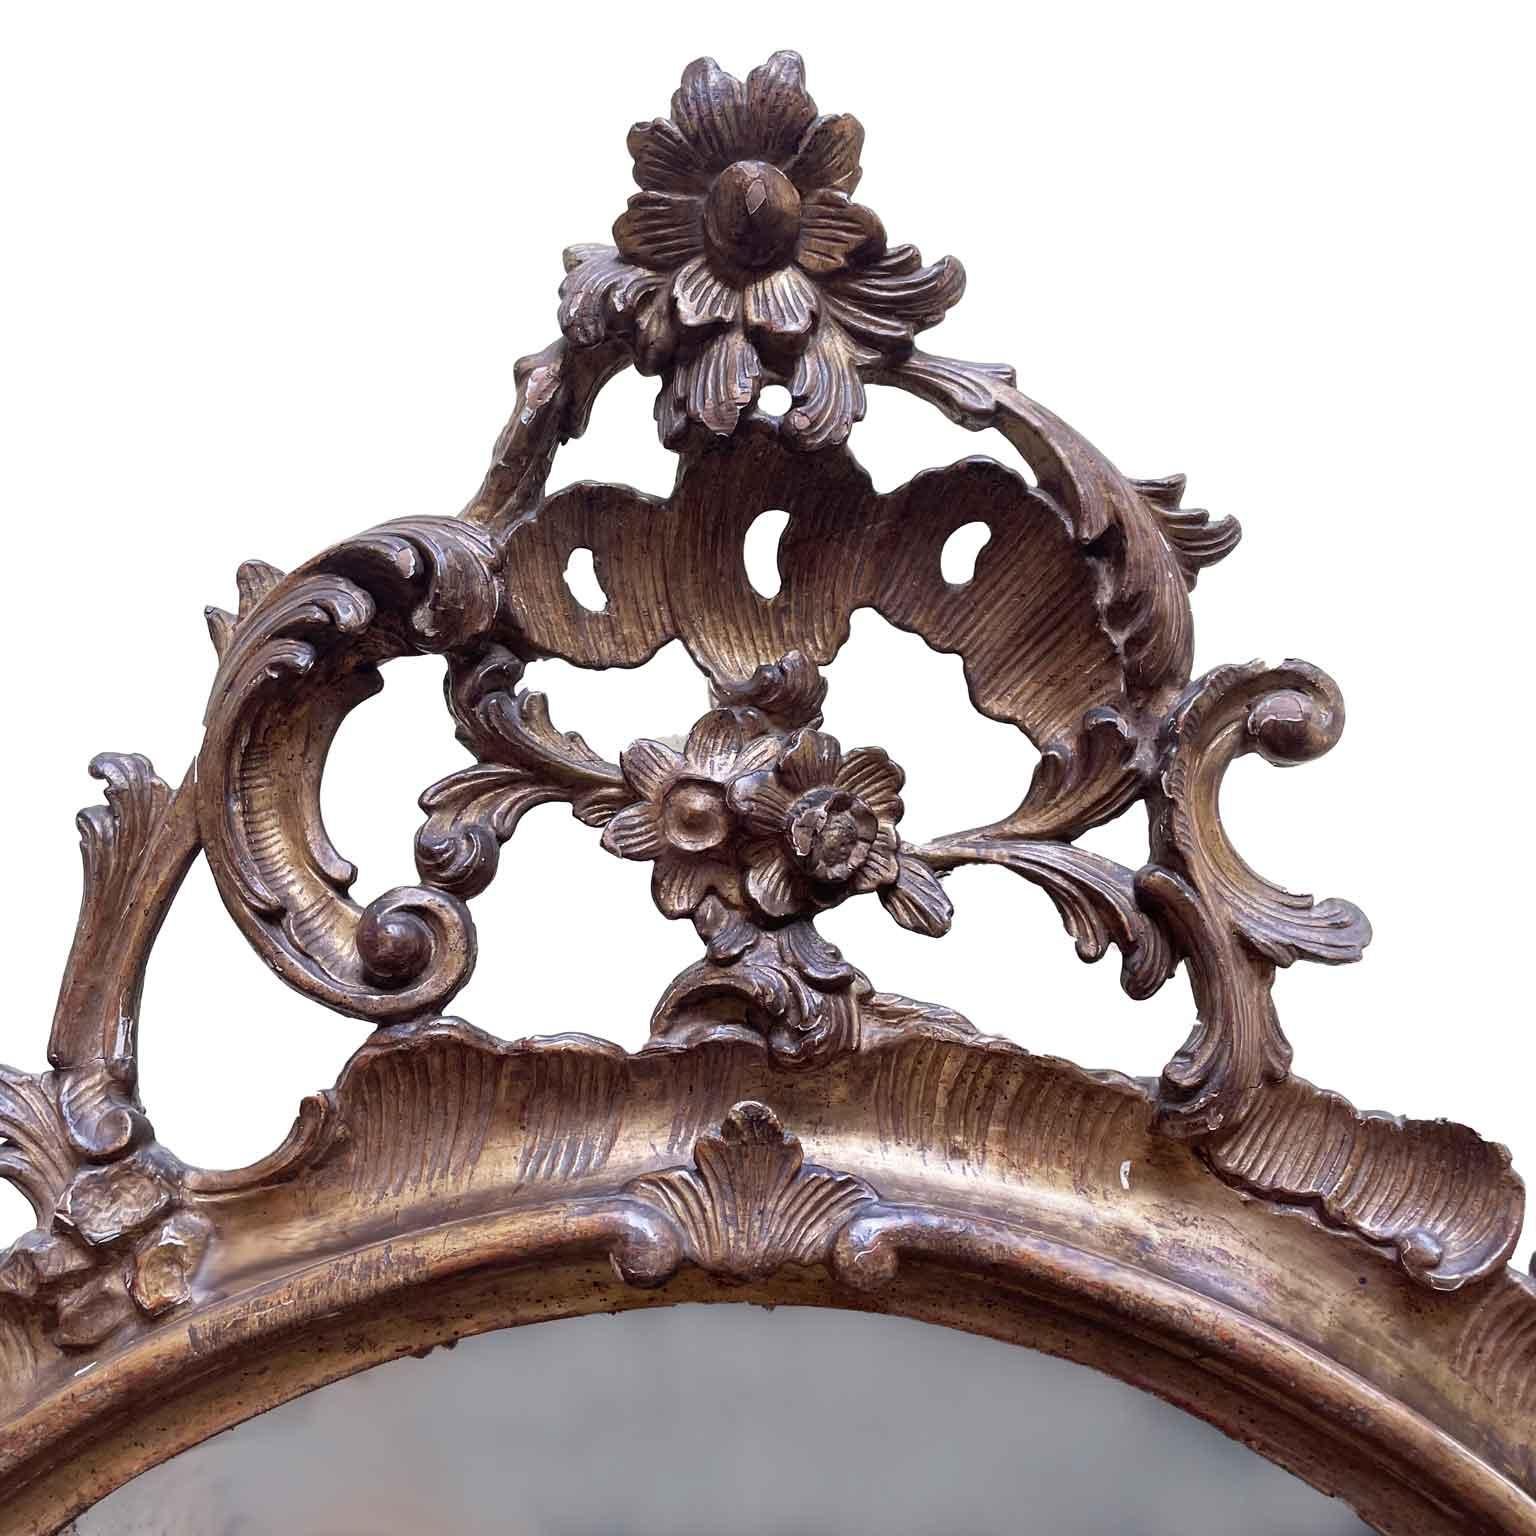 Italian carved and gilded wooden leaf mirror from the mid-1800s, Louis Philippe style,  elaborate carving with plant motifs and scrolls, tall pierced cyma and mercury mirror. Good overall state of preservation apart from minimal shortcomings